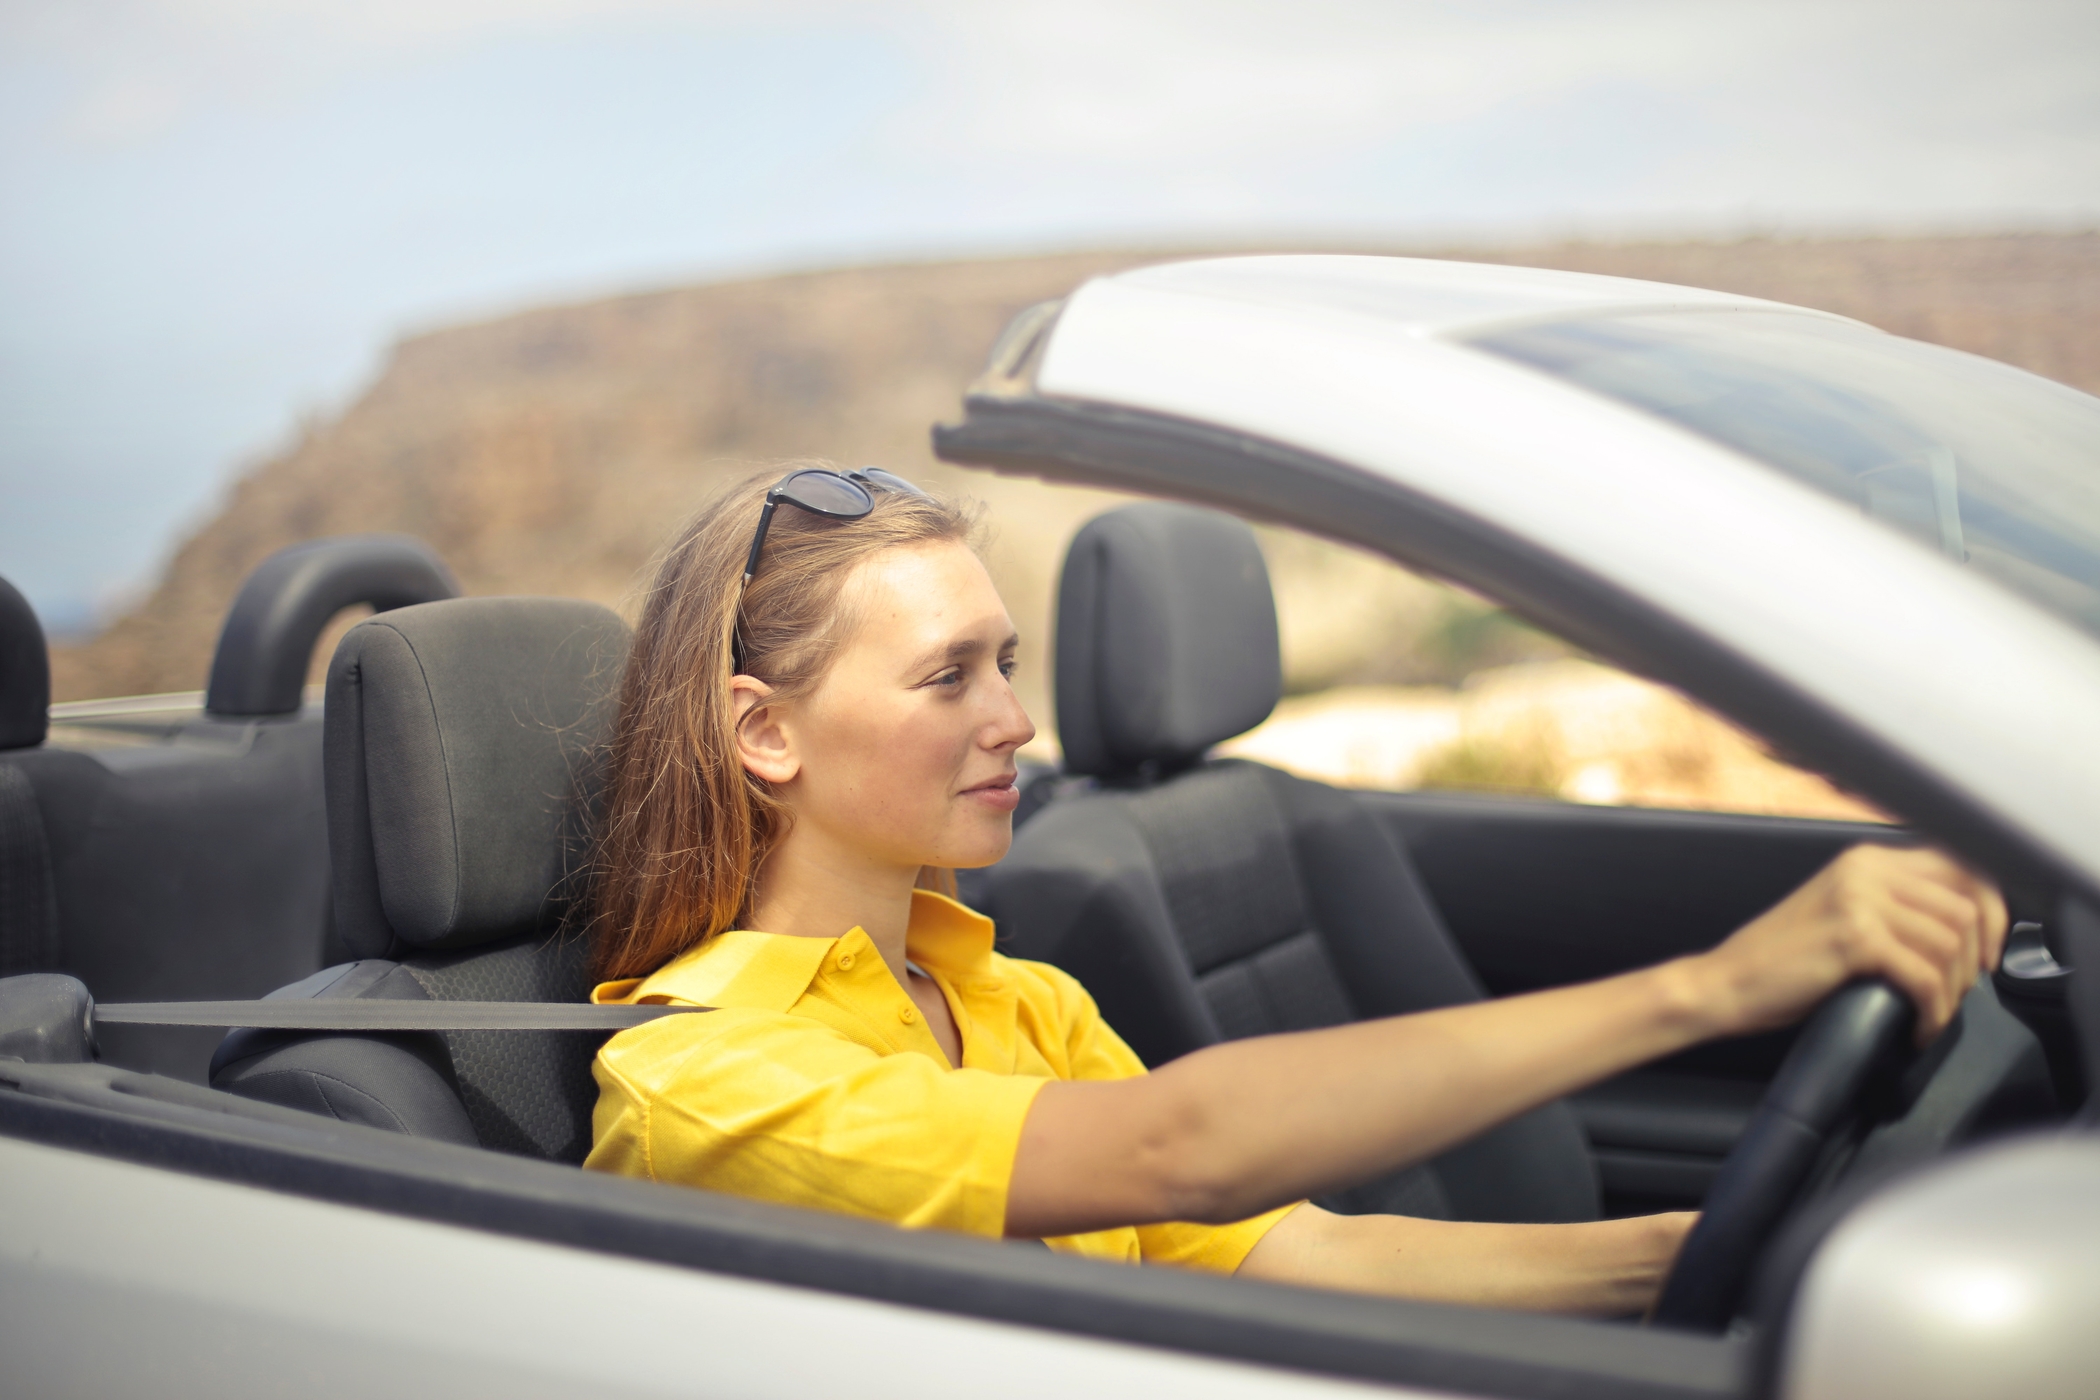 Vigilance and caution – a female driver’s two best friends